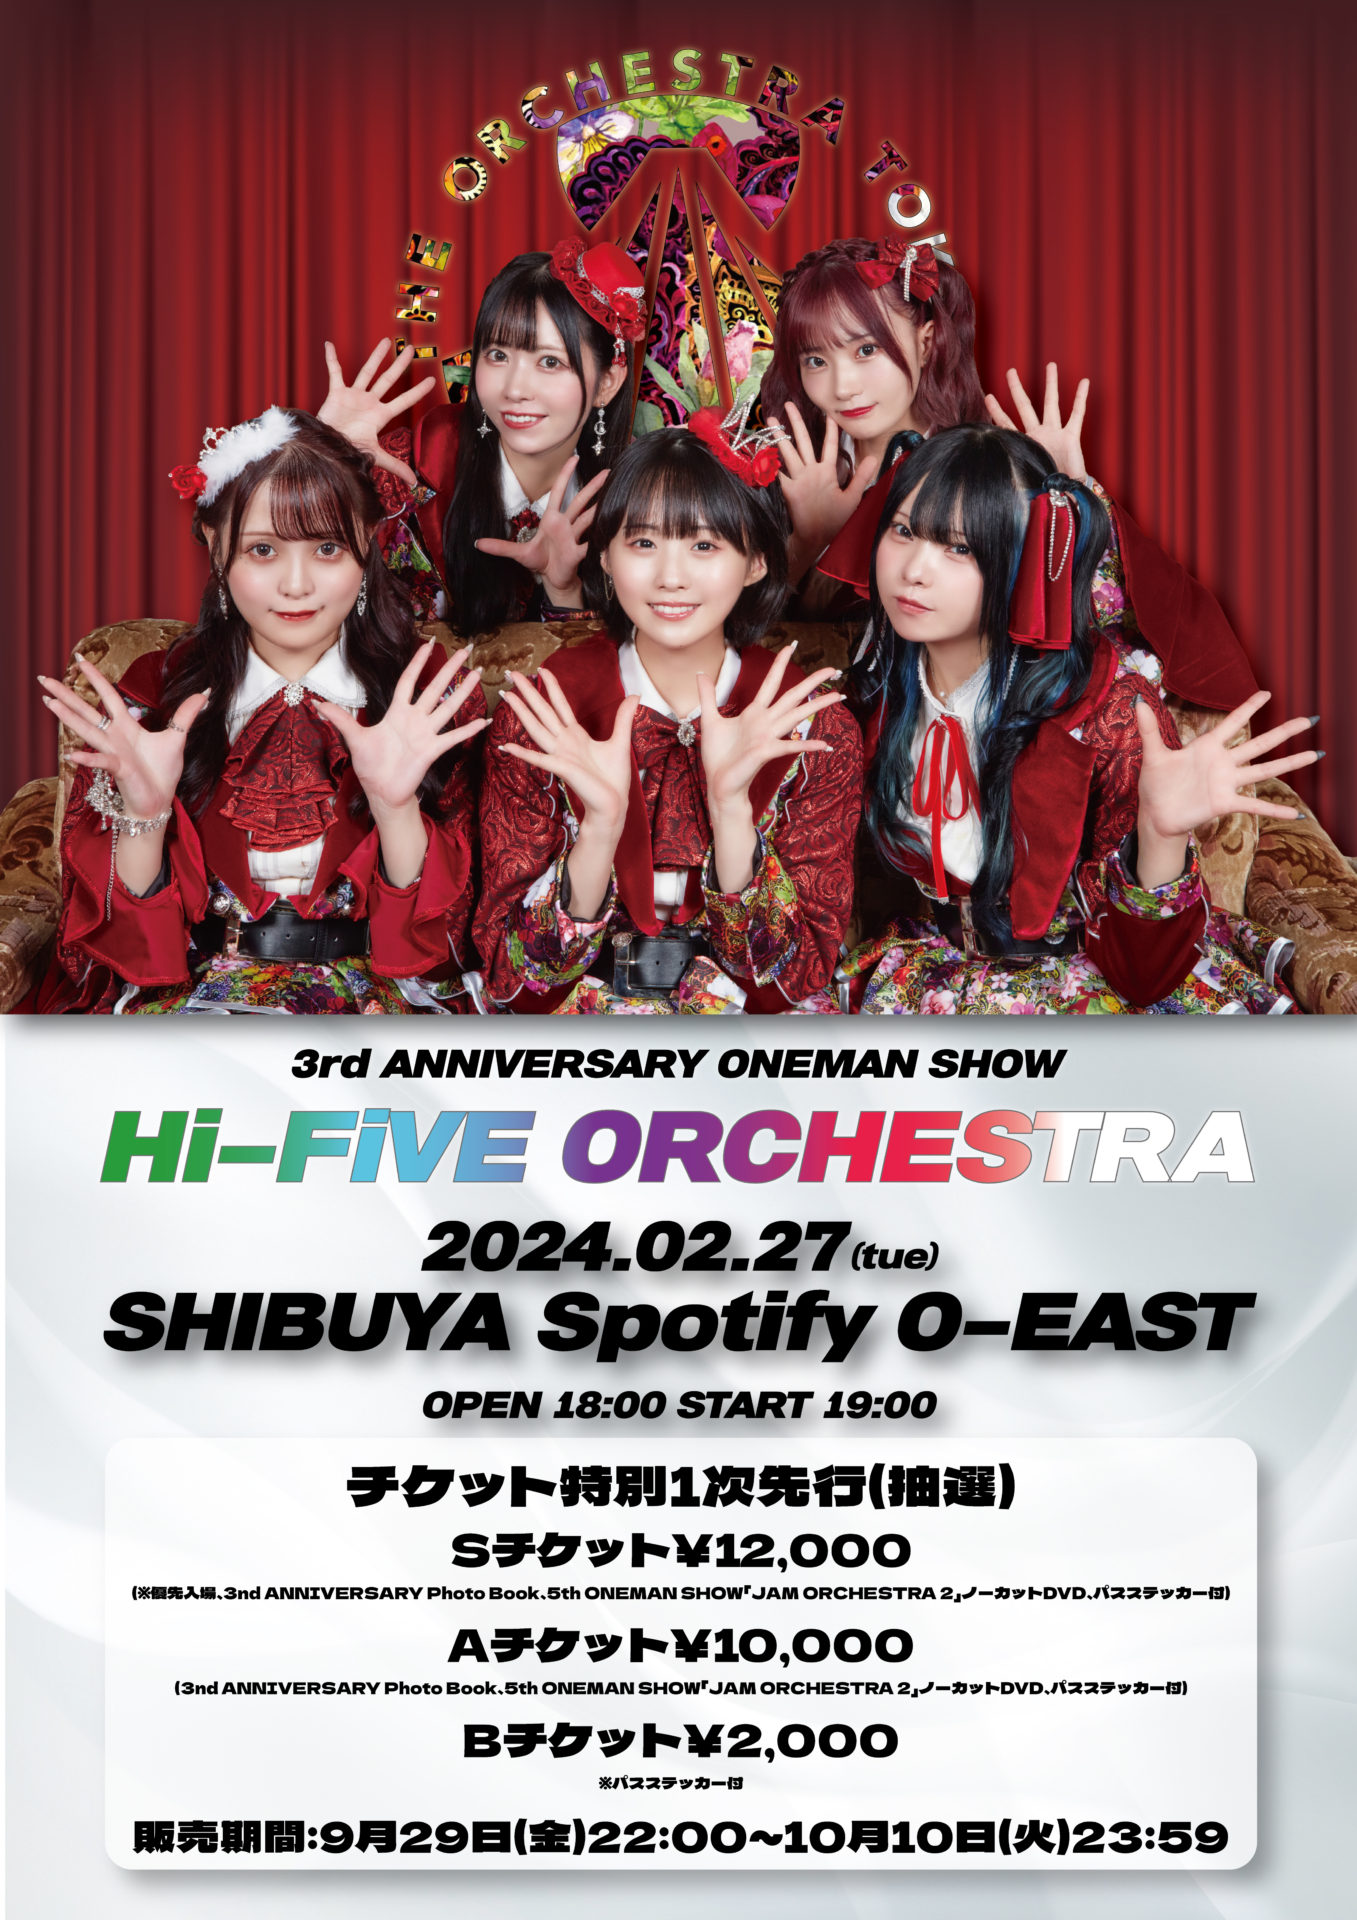 THE ORCHESTRA TOKYO 3rd ANNIVERSARY ONEMAN SHOW『Hi-FiVE ORCHESTRA』